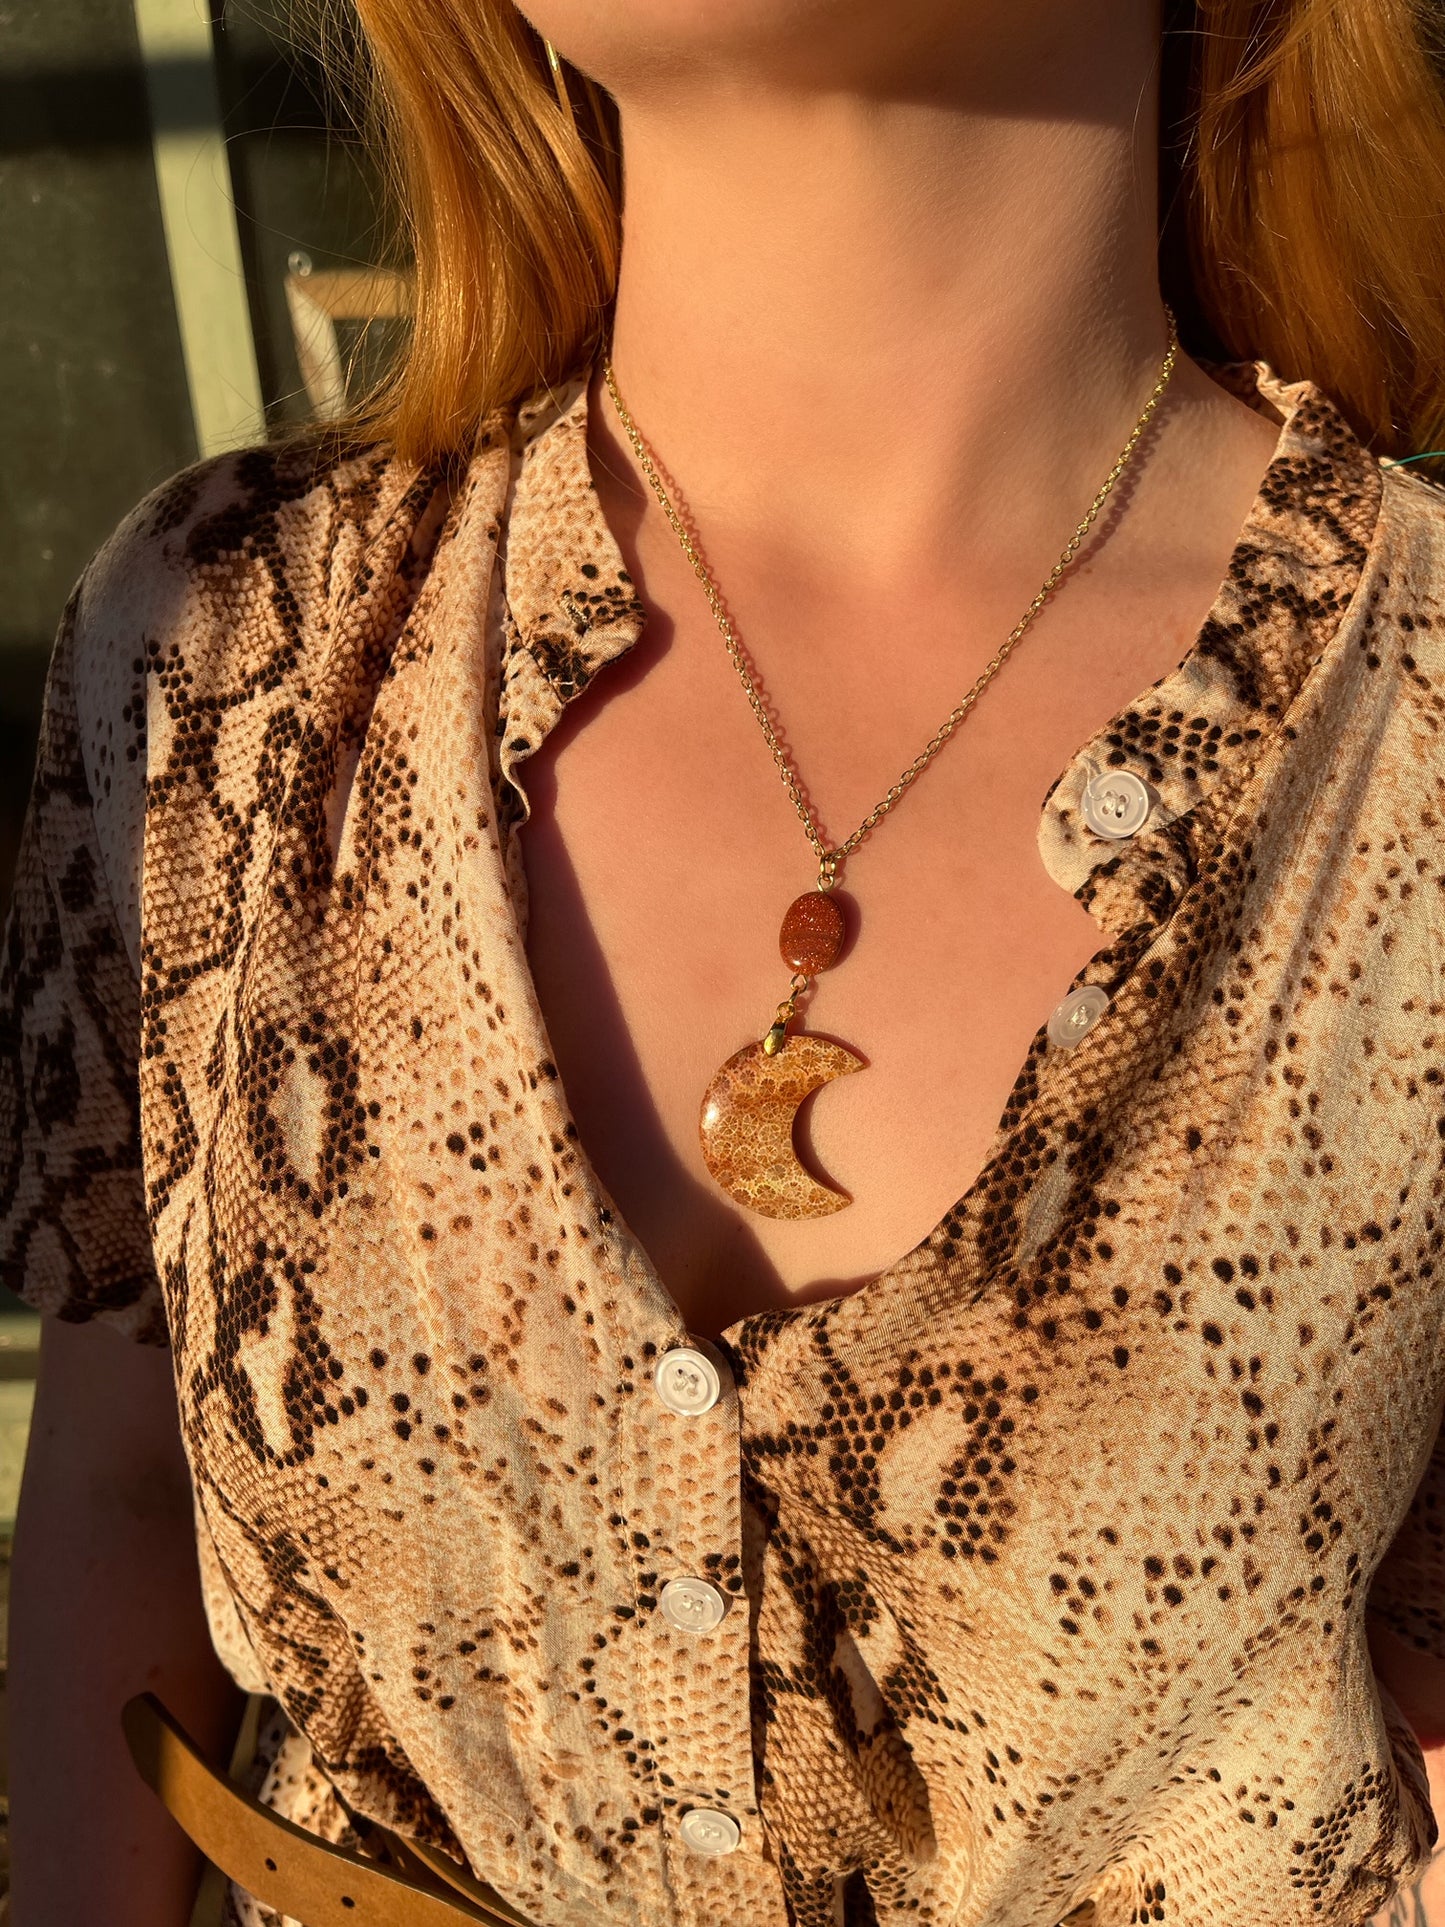 Fossil Coral Crescent Moon Necklace